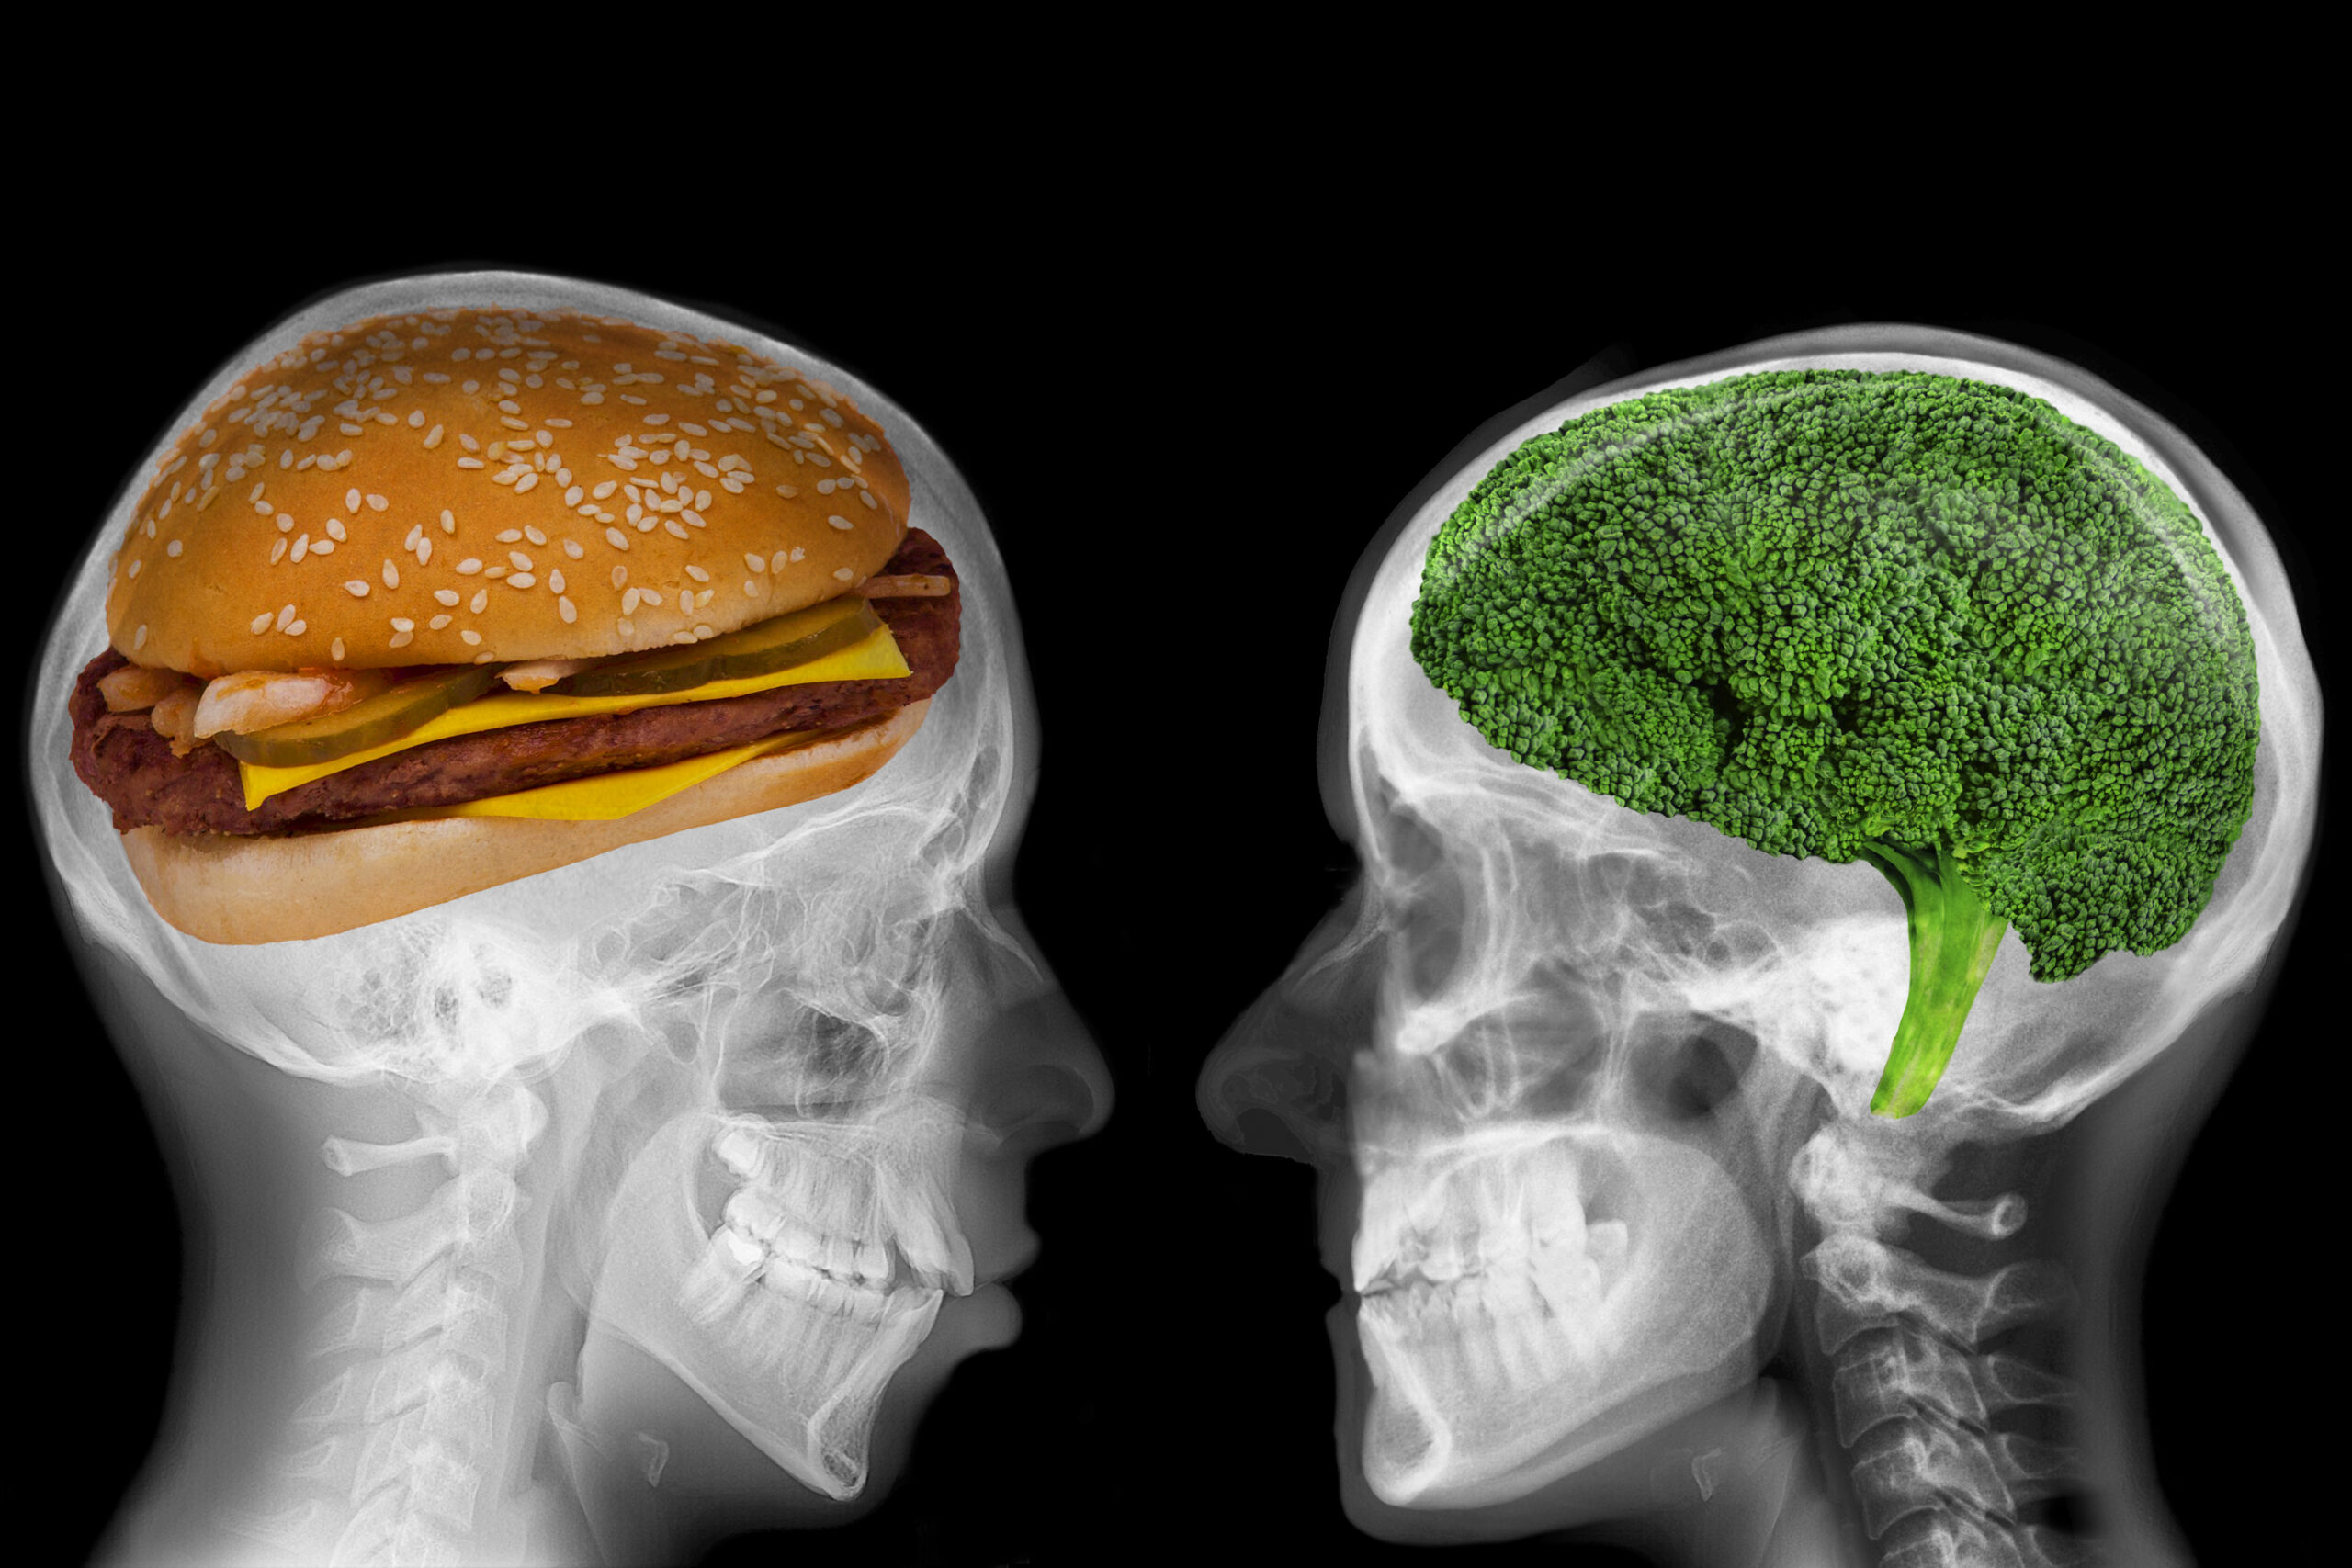 New research shows “profound” link between dietary choices and brain health